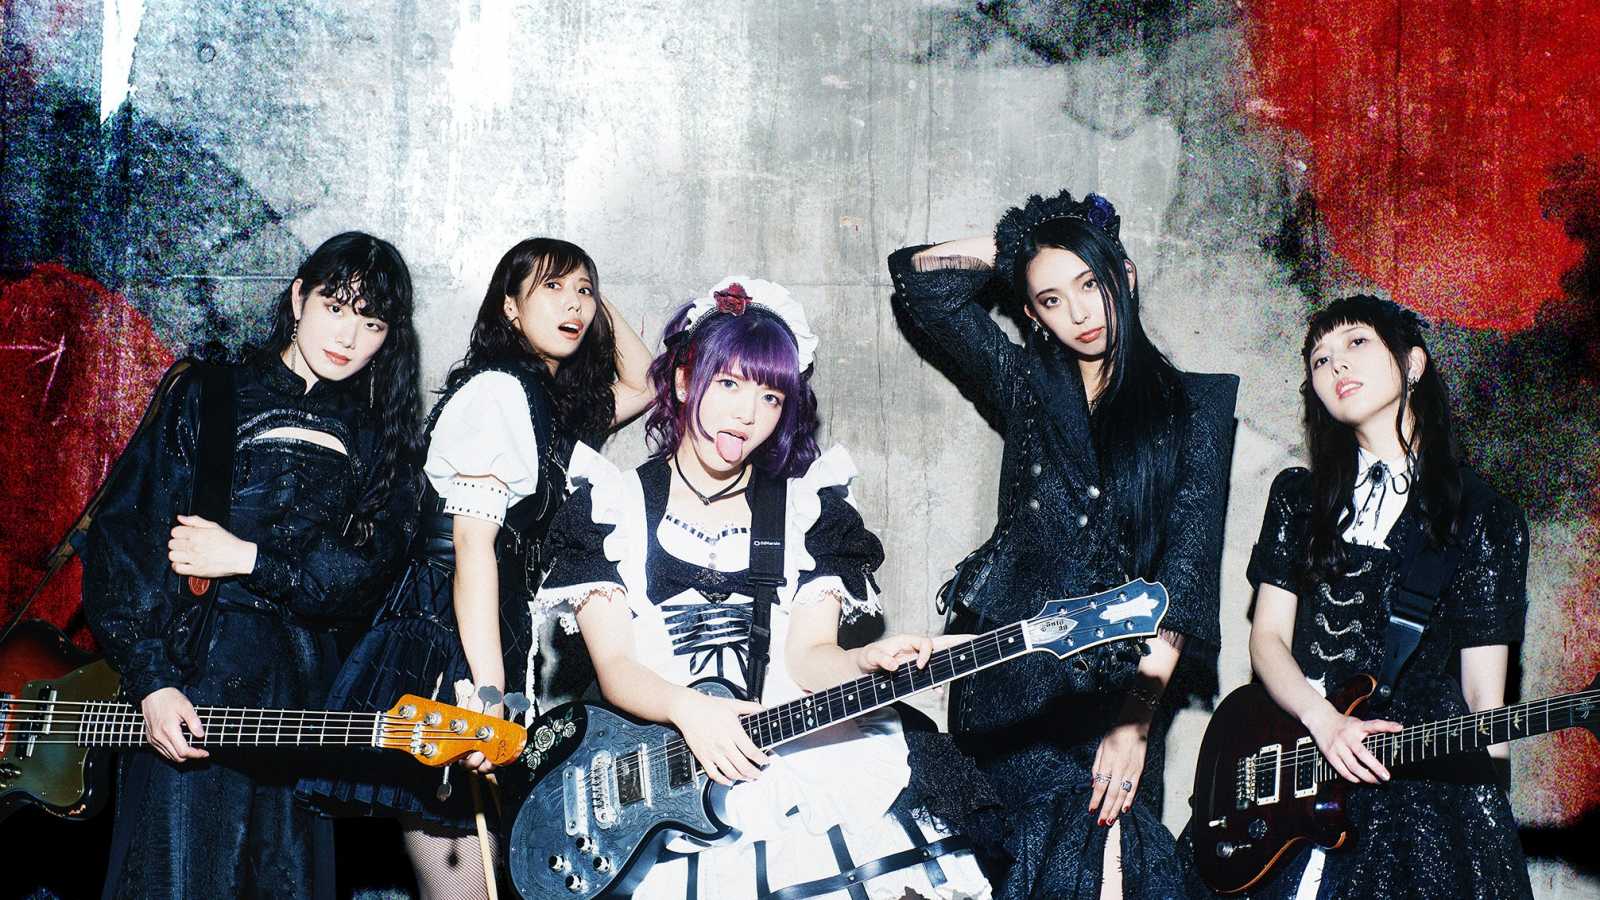 BAND-MAID chante pour le reboot de Goldorak © BAND-MAID. All rights reserved.